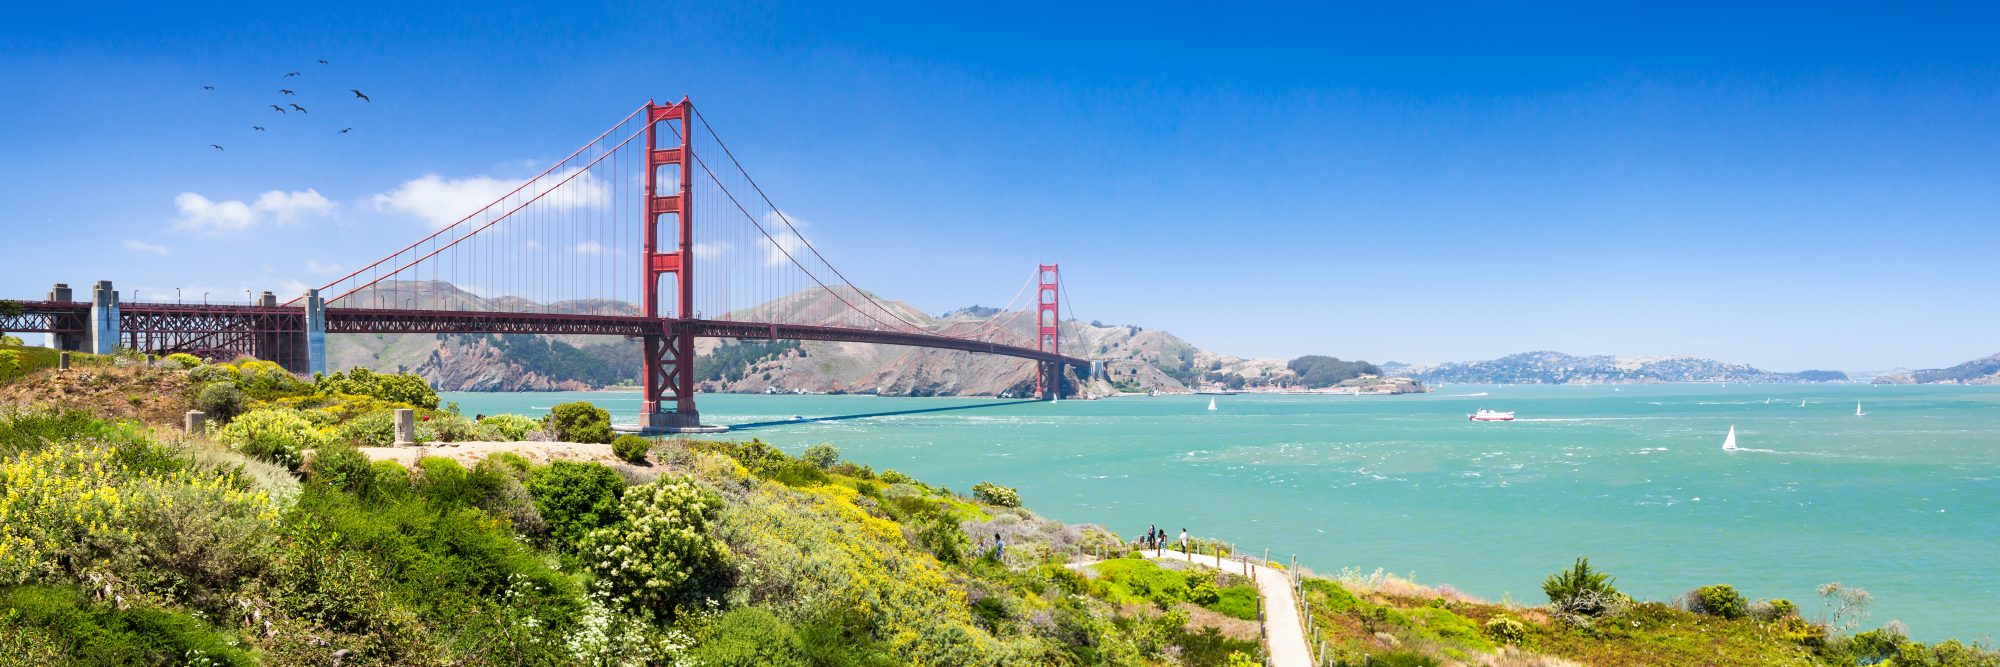 A beautiful image of the Golden Gate Bridge. If you or a loved one was discriminated against in the workplace, contact the Walnut Creek discrimination attorneys today.